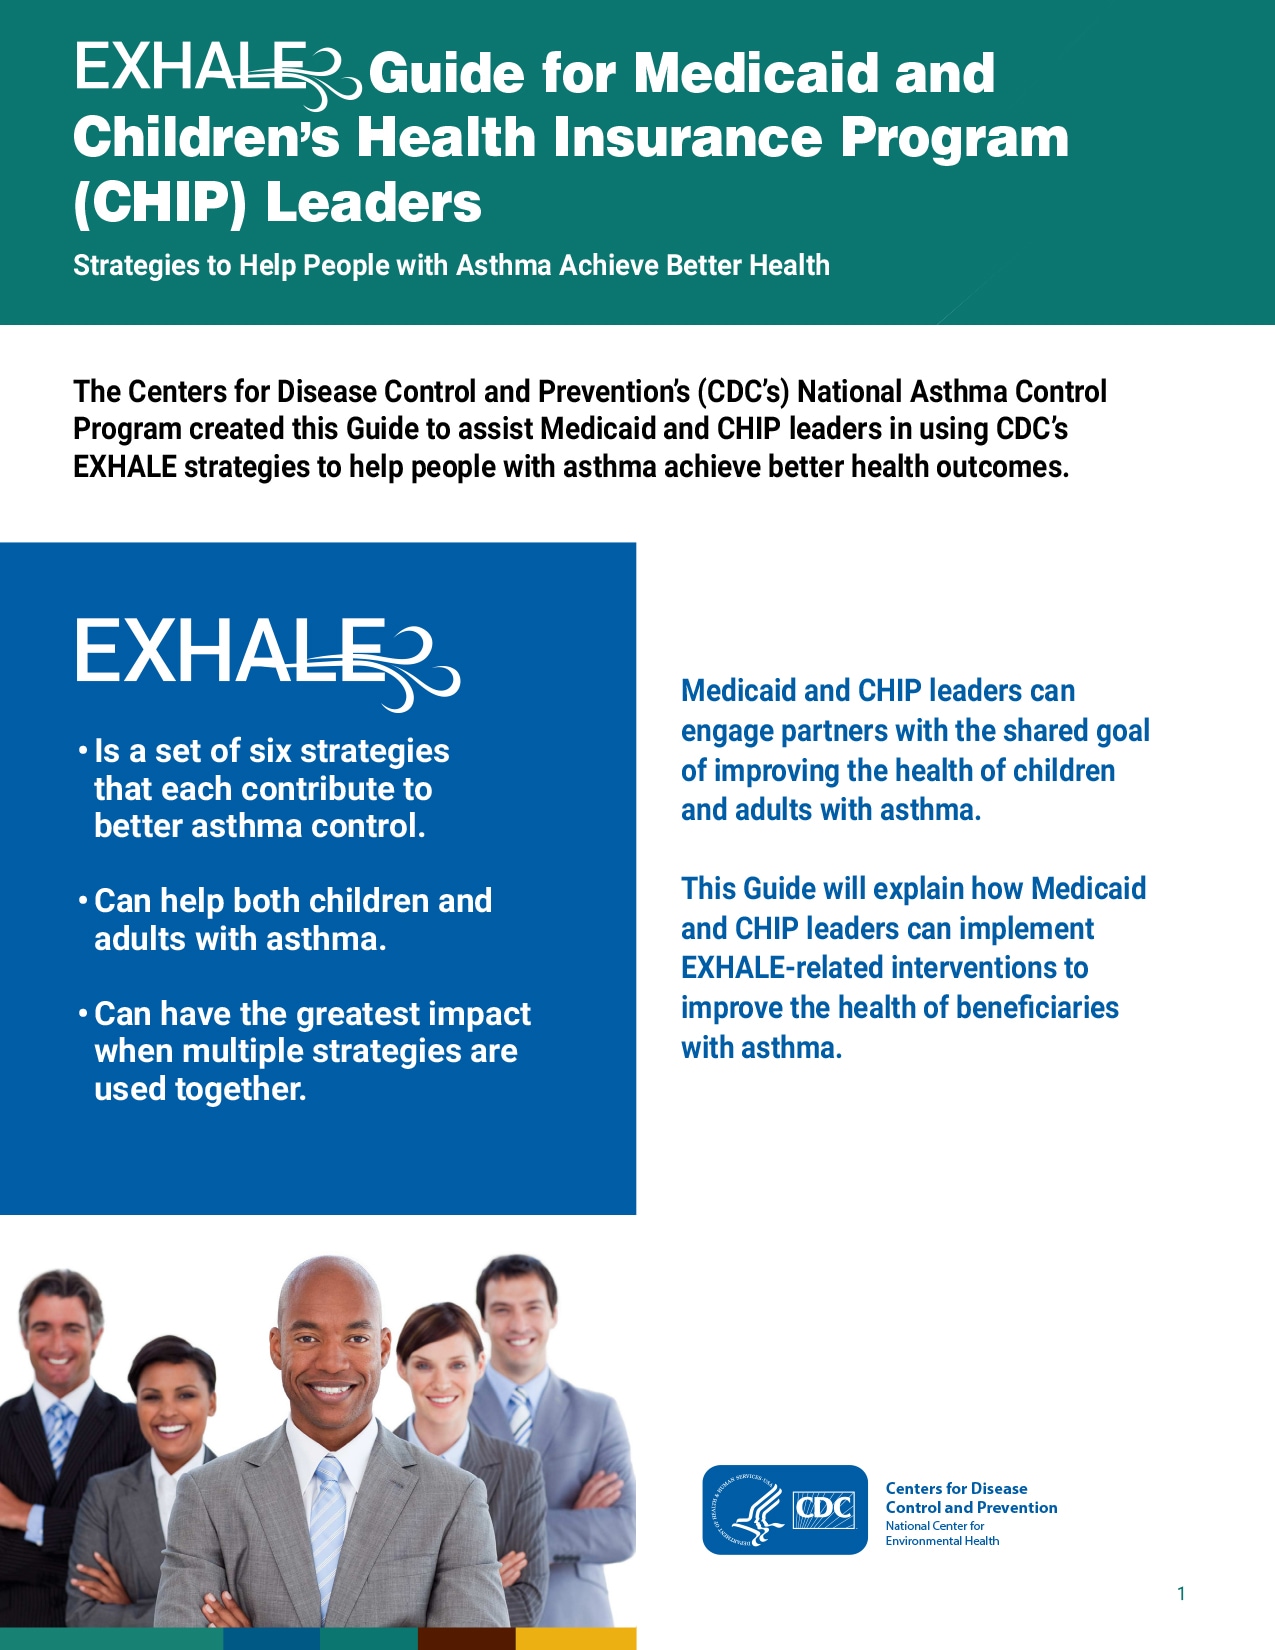 EXHALE Guide for Medicaid and Children's Health Insurance Program (CHIP) Leaders